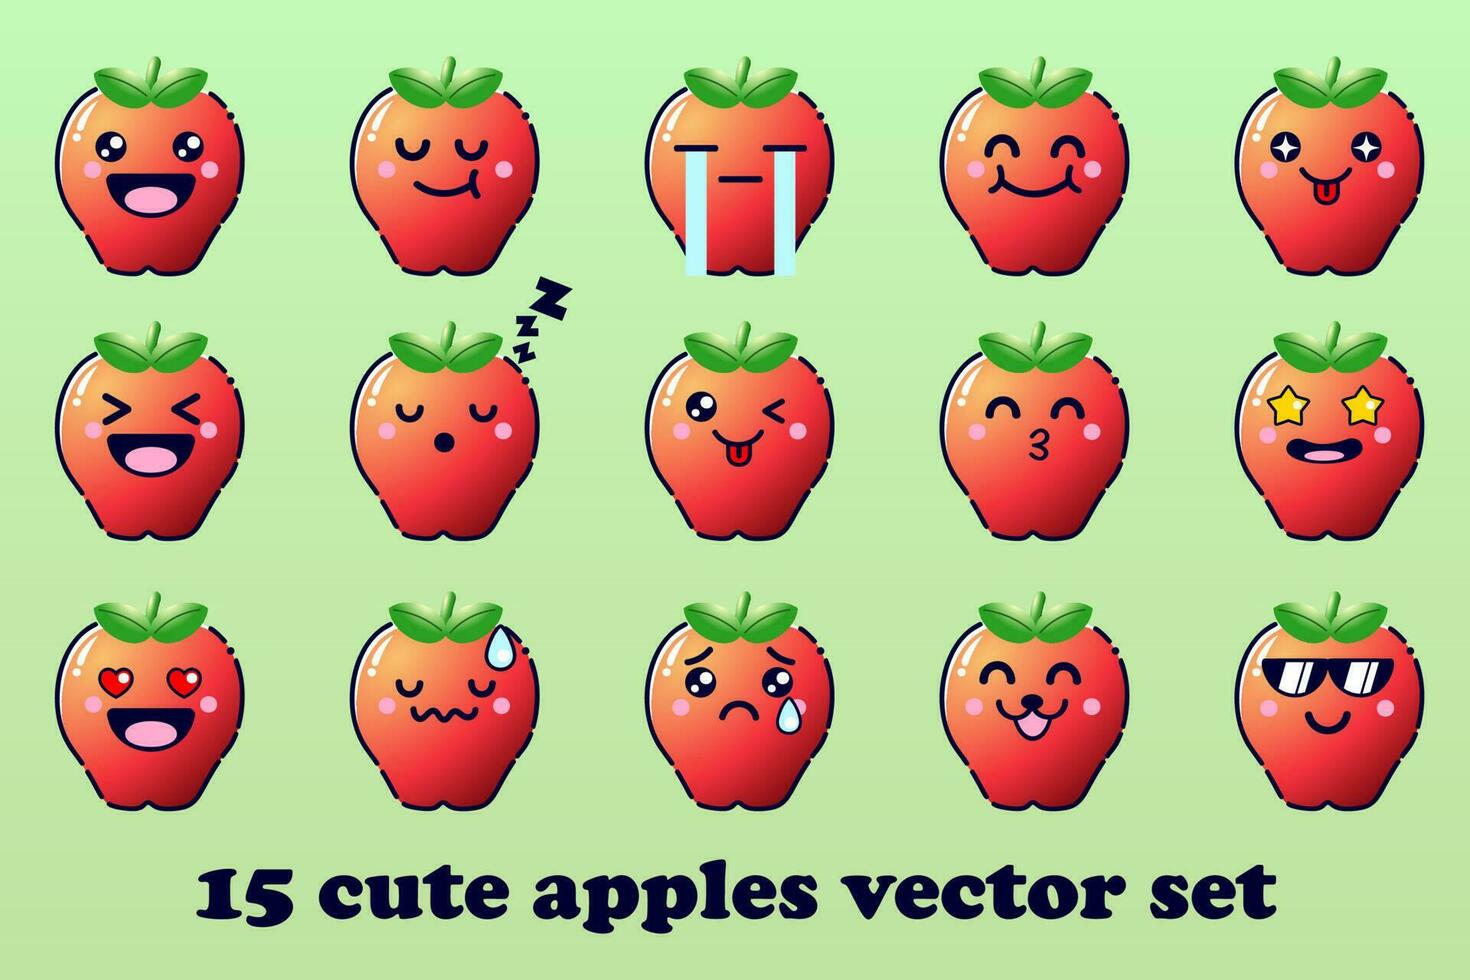 Cute Cartoon Apple Fruit with Kawaii Faces and Chibi Style Emoticon Vector Set